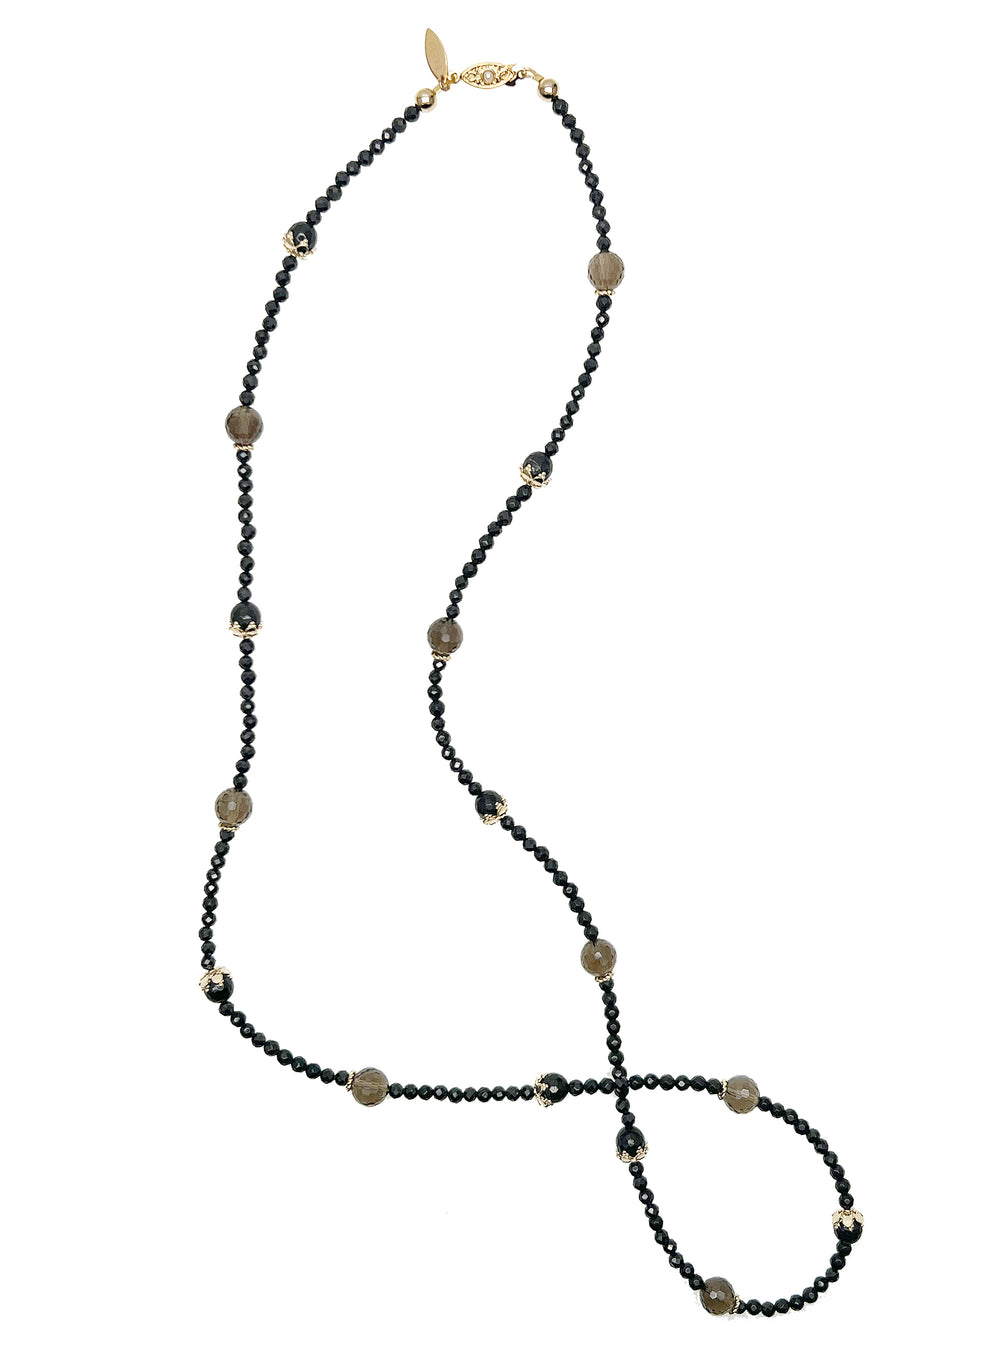 Black Obsidian And Smoky Multi-Way Necklace KN054 - FARRA